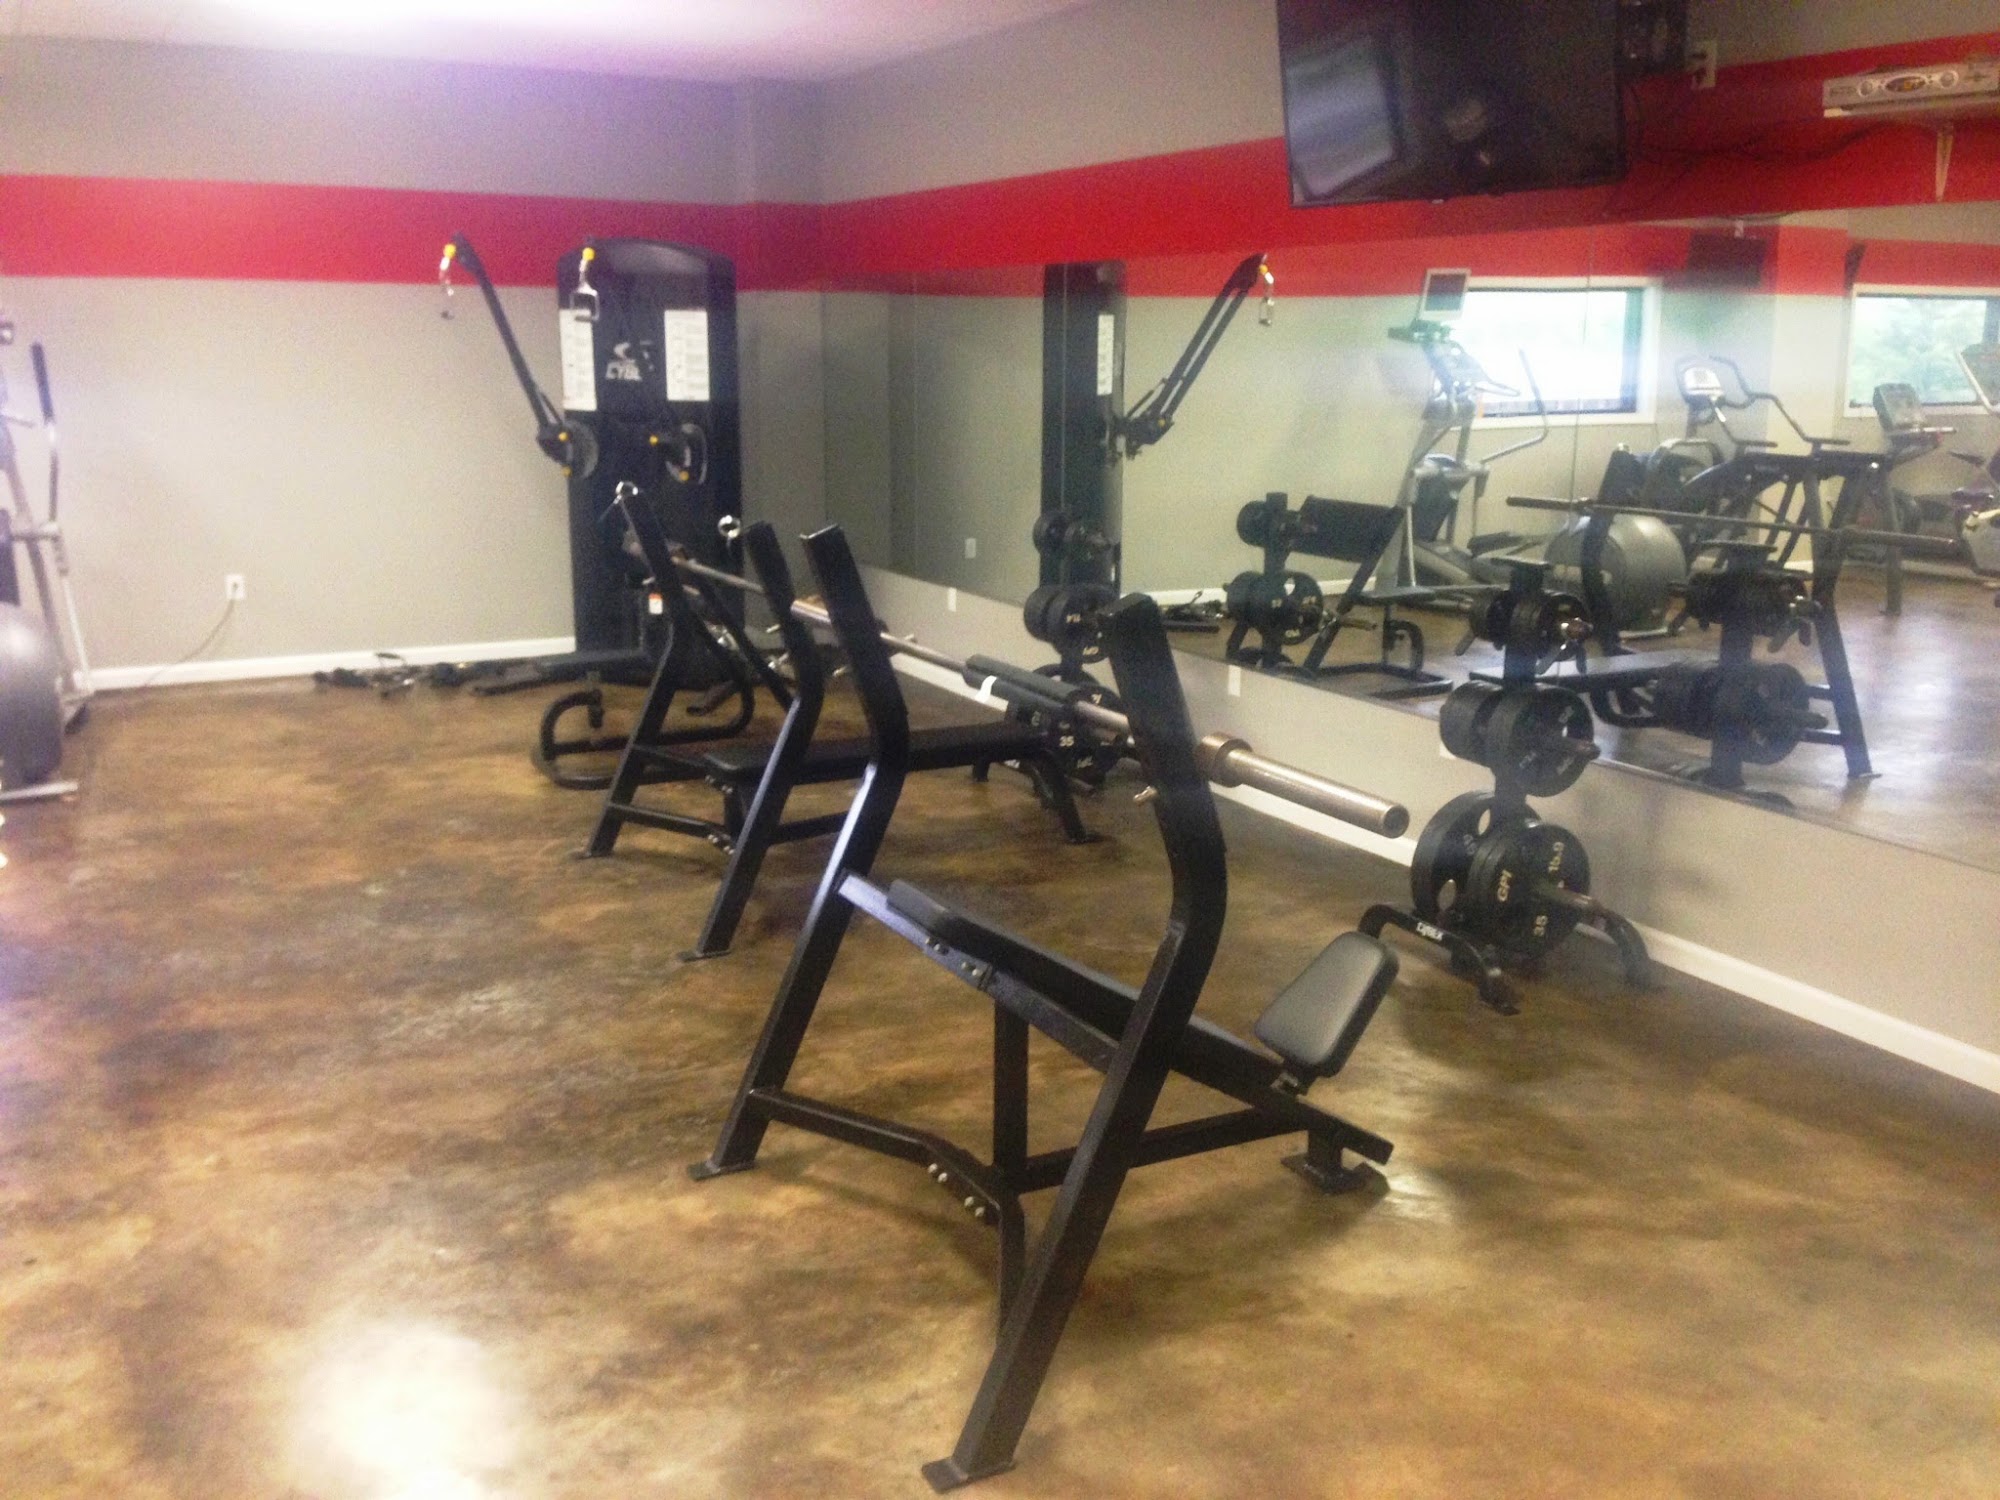 Ivy Physical Therapy, PA 201 S 7th St, Heber Springs Arkansas 72543